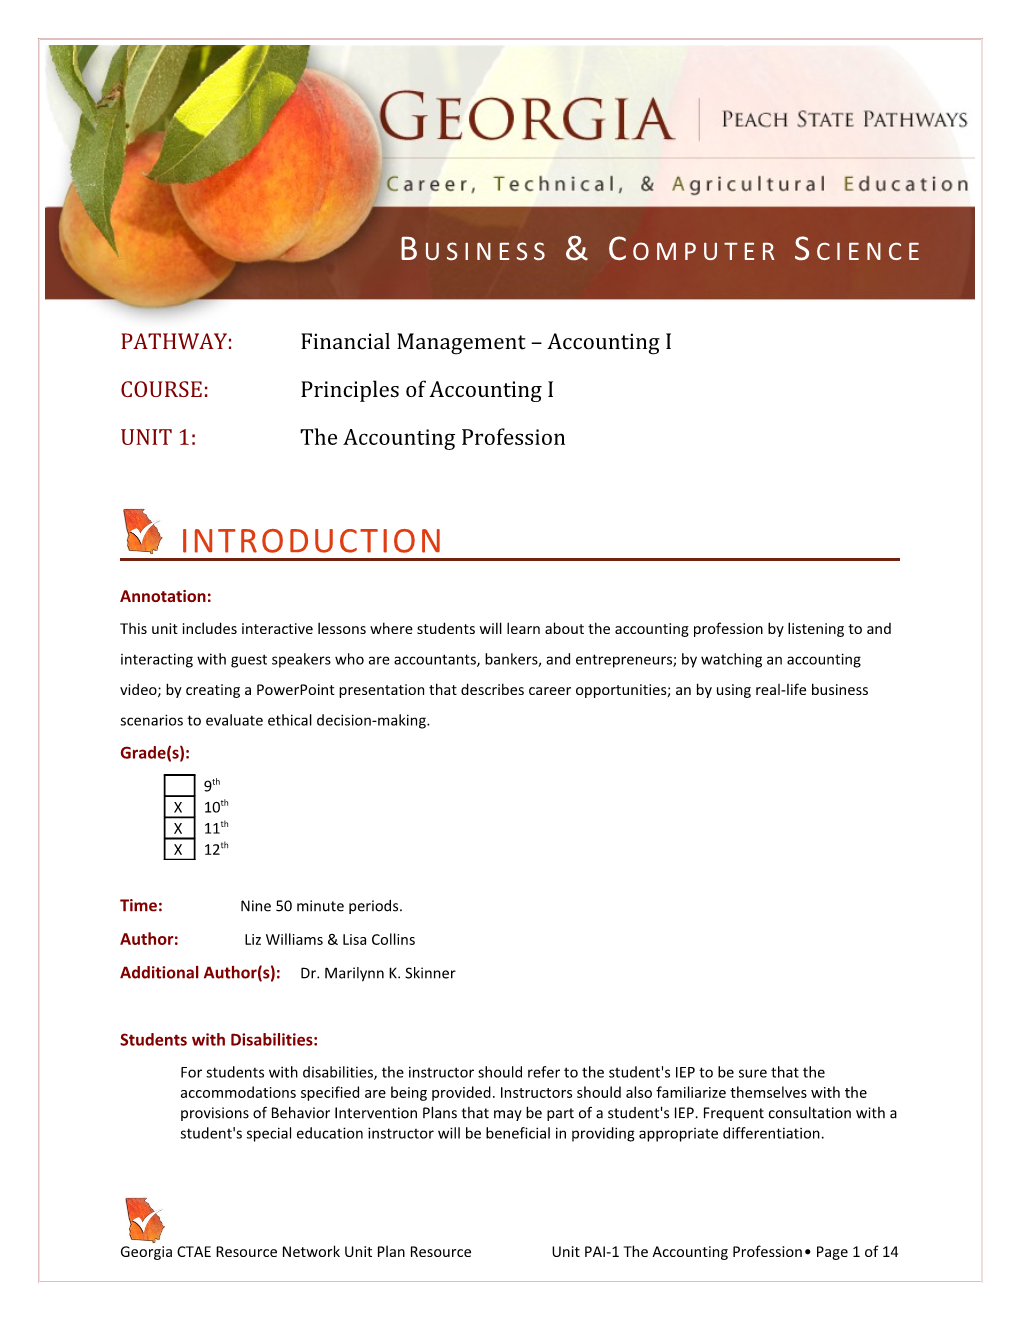 PATHWAY: Financial Management Accounting I